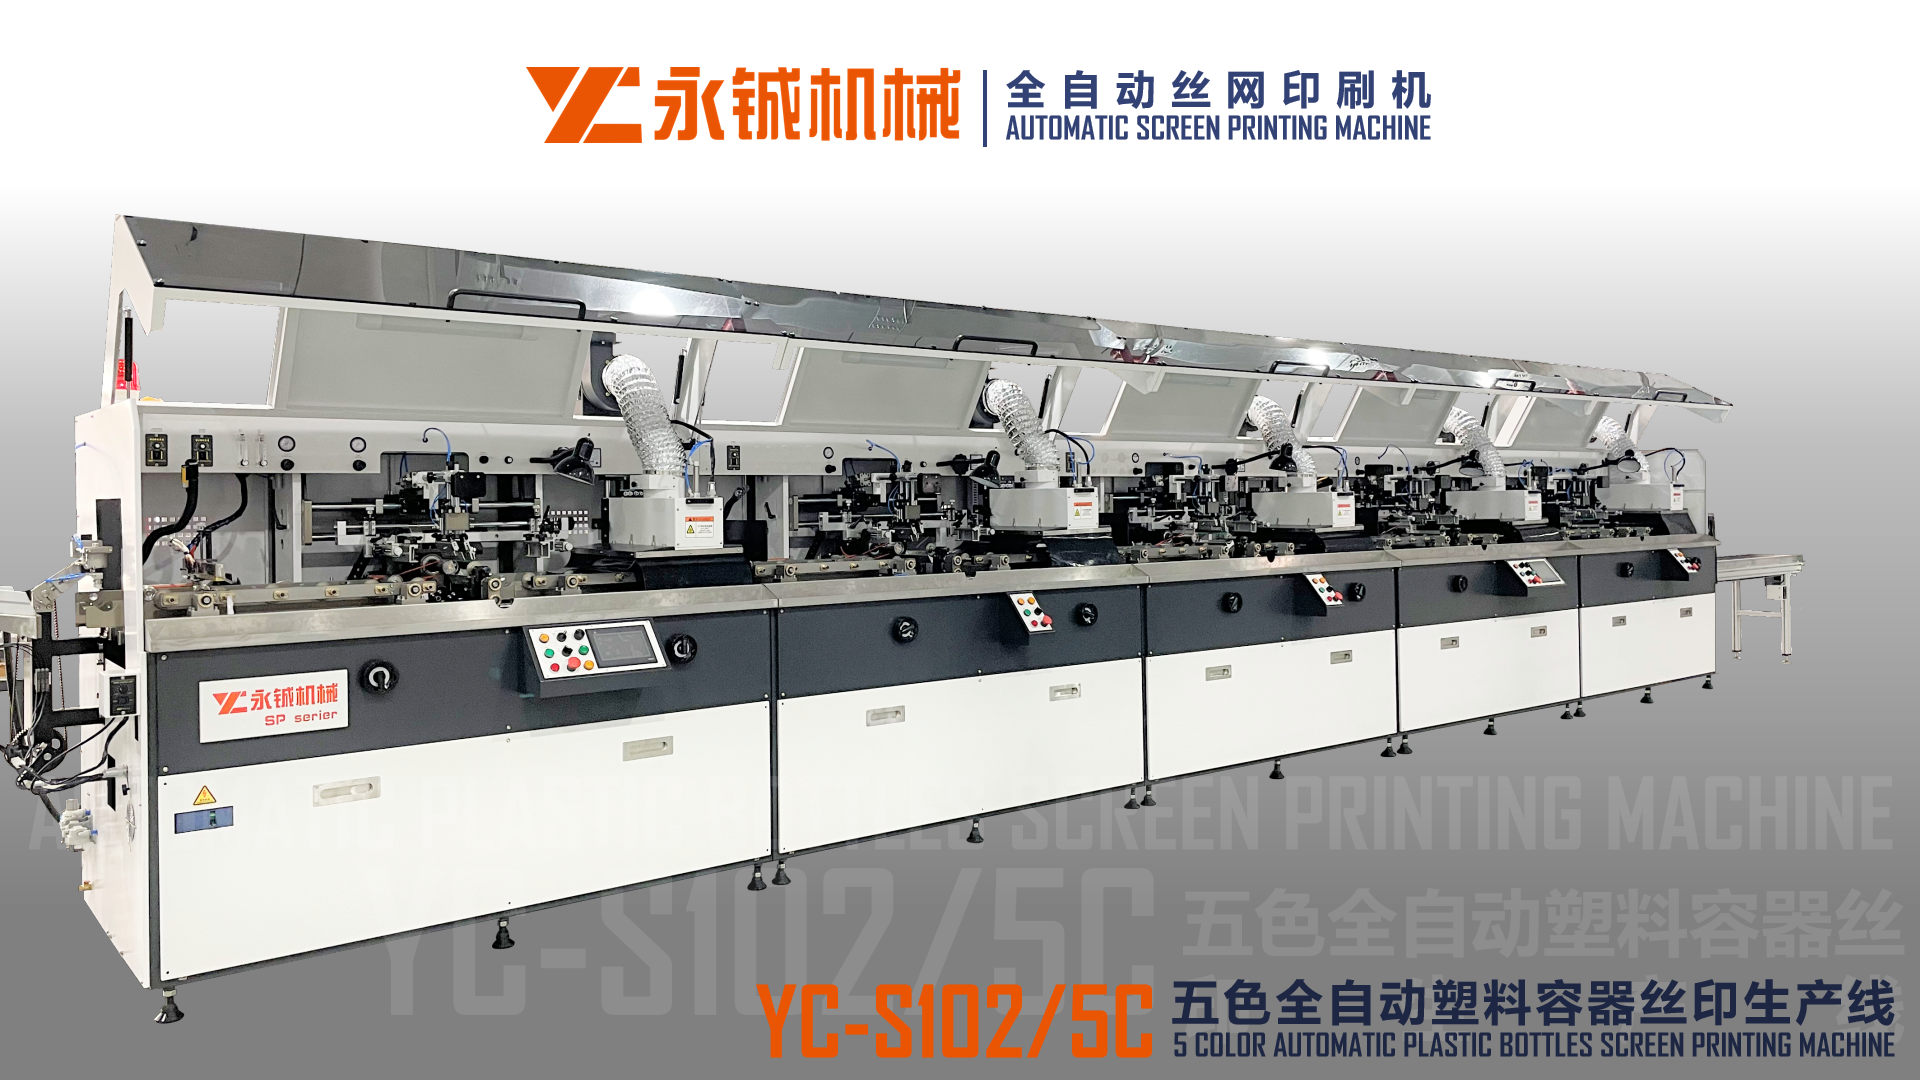 Automatic screen printing machine for cylindrical plastic bottles 